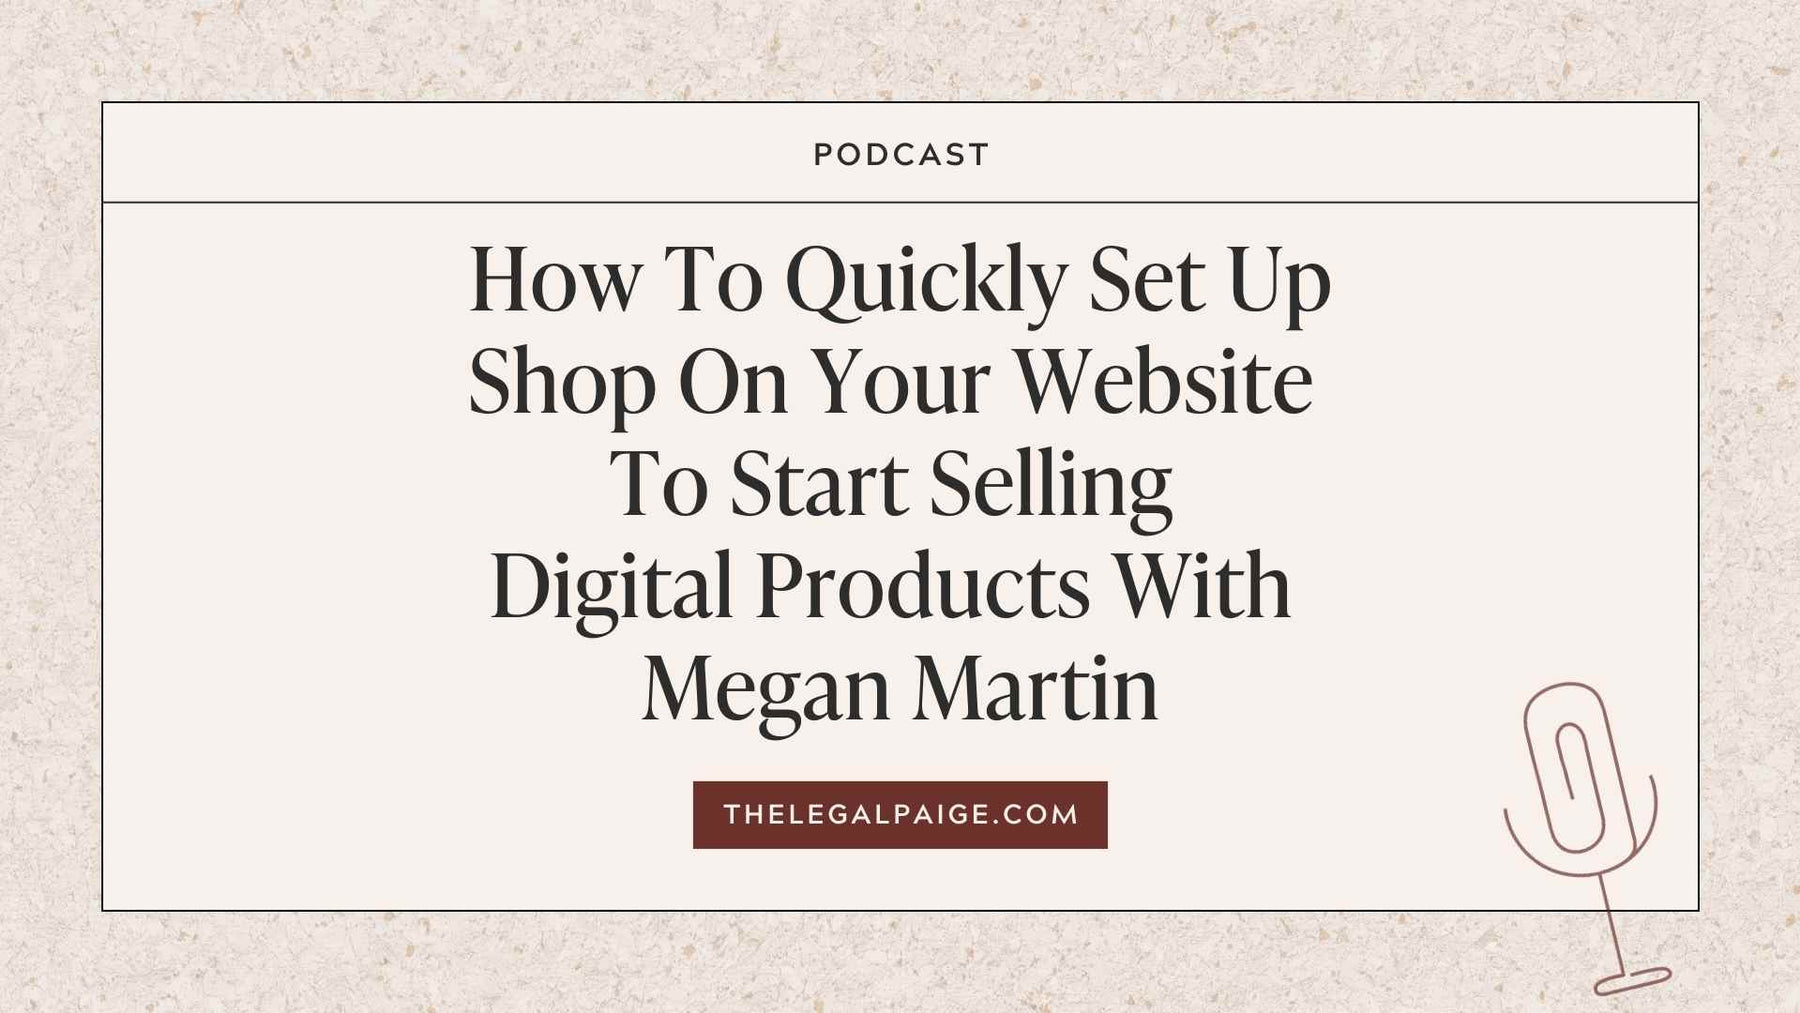 Episode 101: How To Quickly Set Up Shop On Your Website To Start Selling Digital Products With Megan Martin